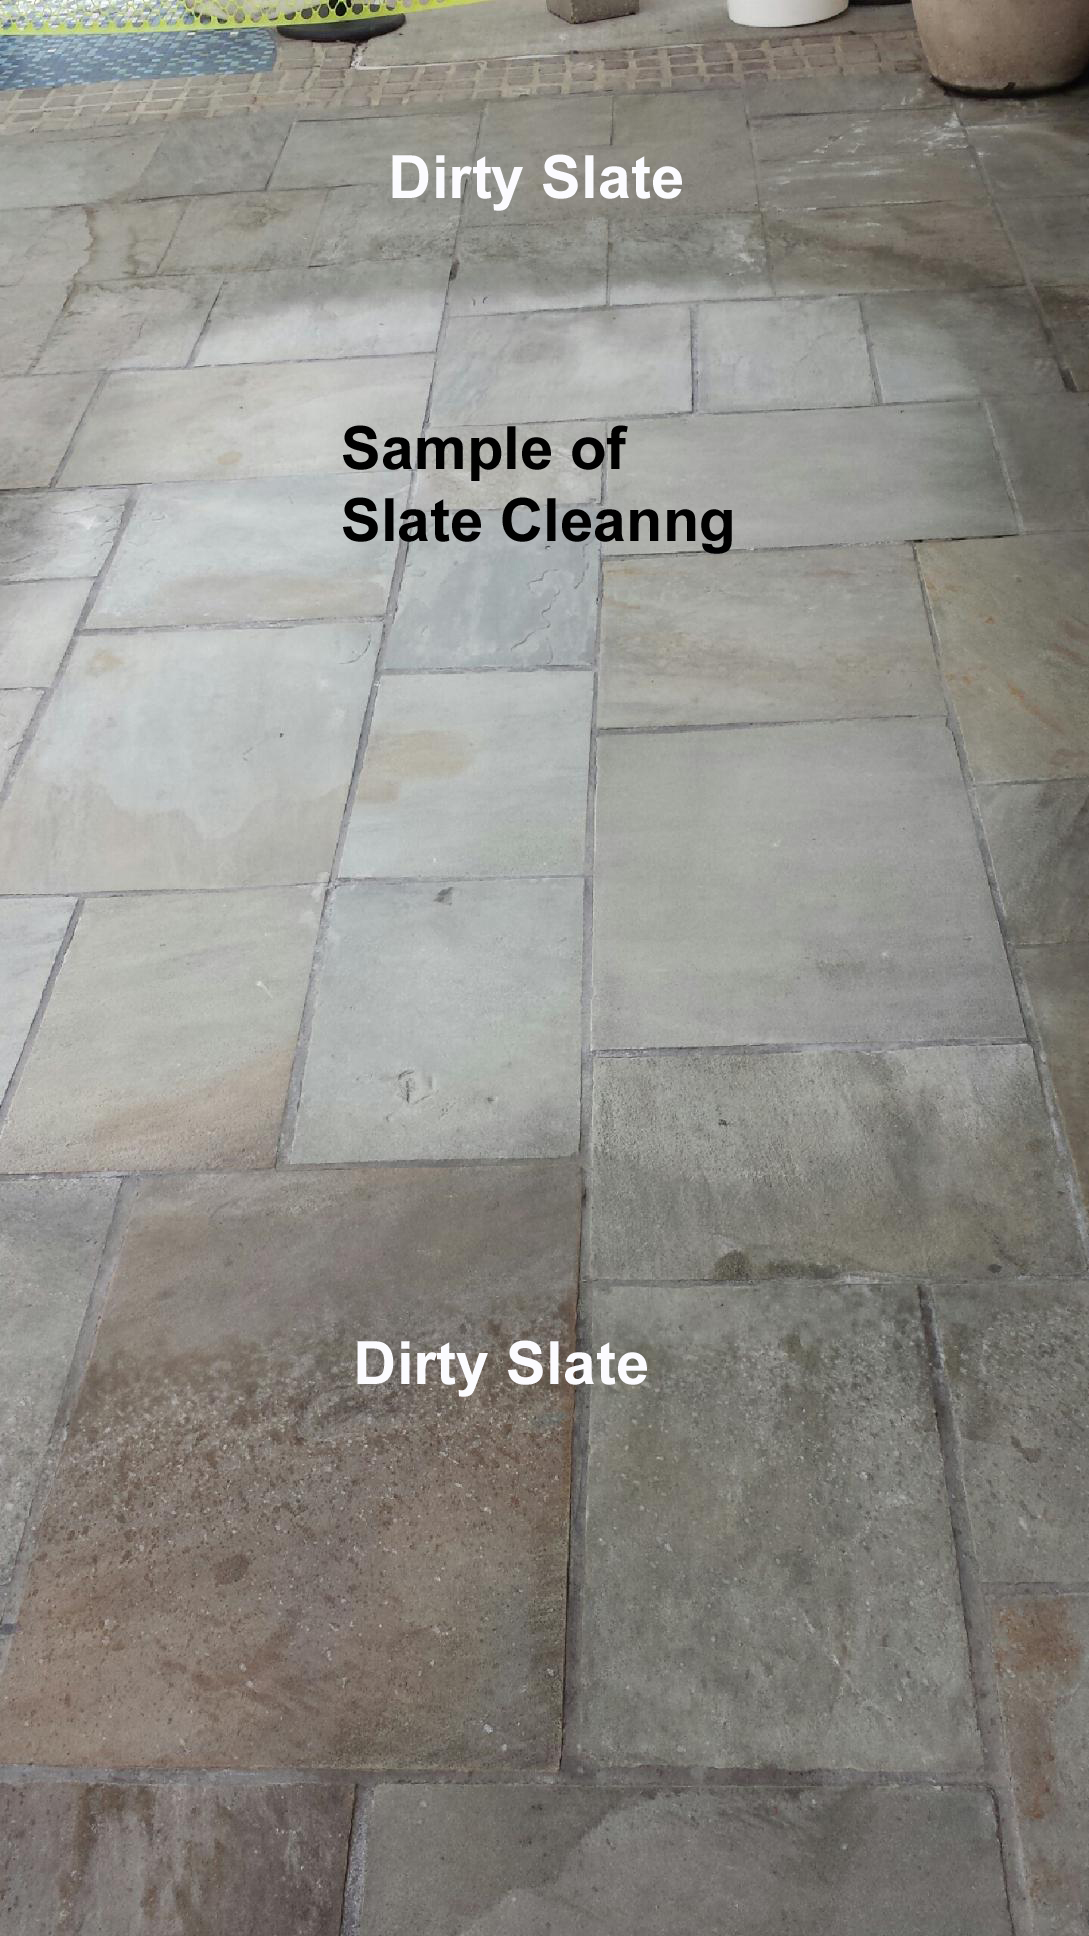 How To Clean Textured Stones And Tiles, How To Clean Dirty Floor Tiles